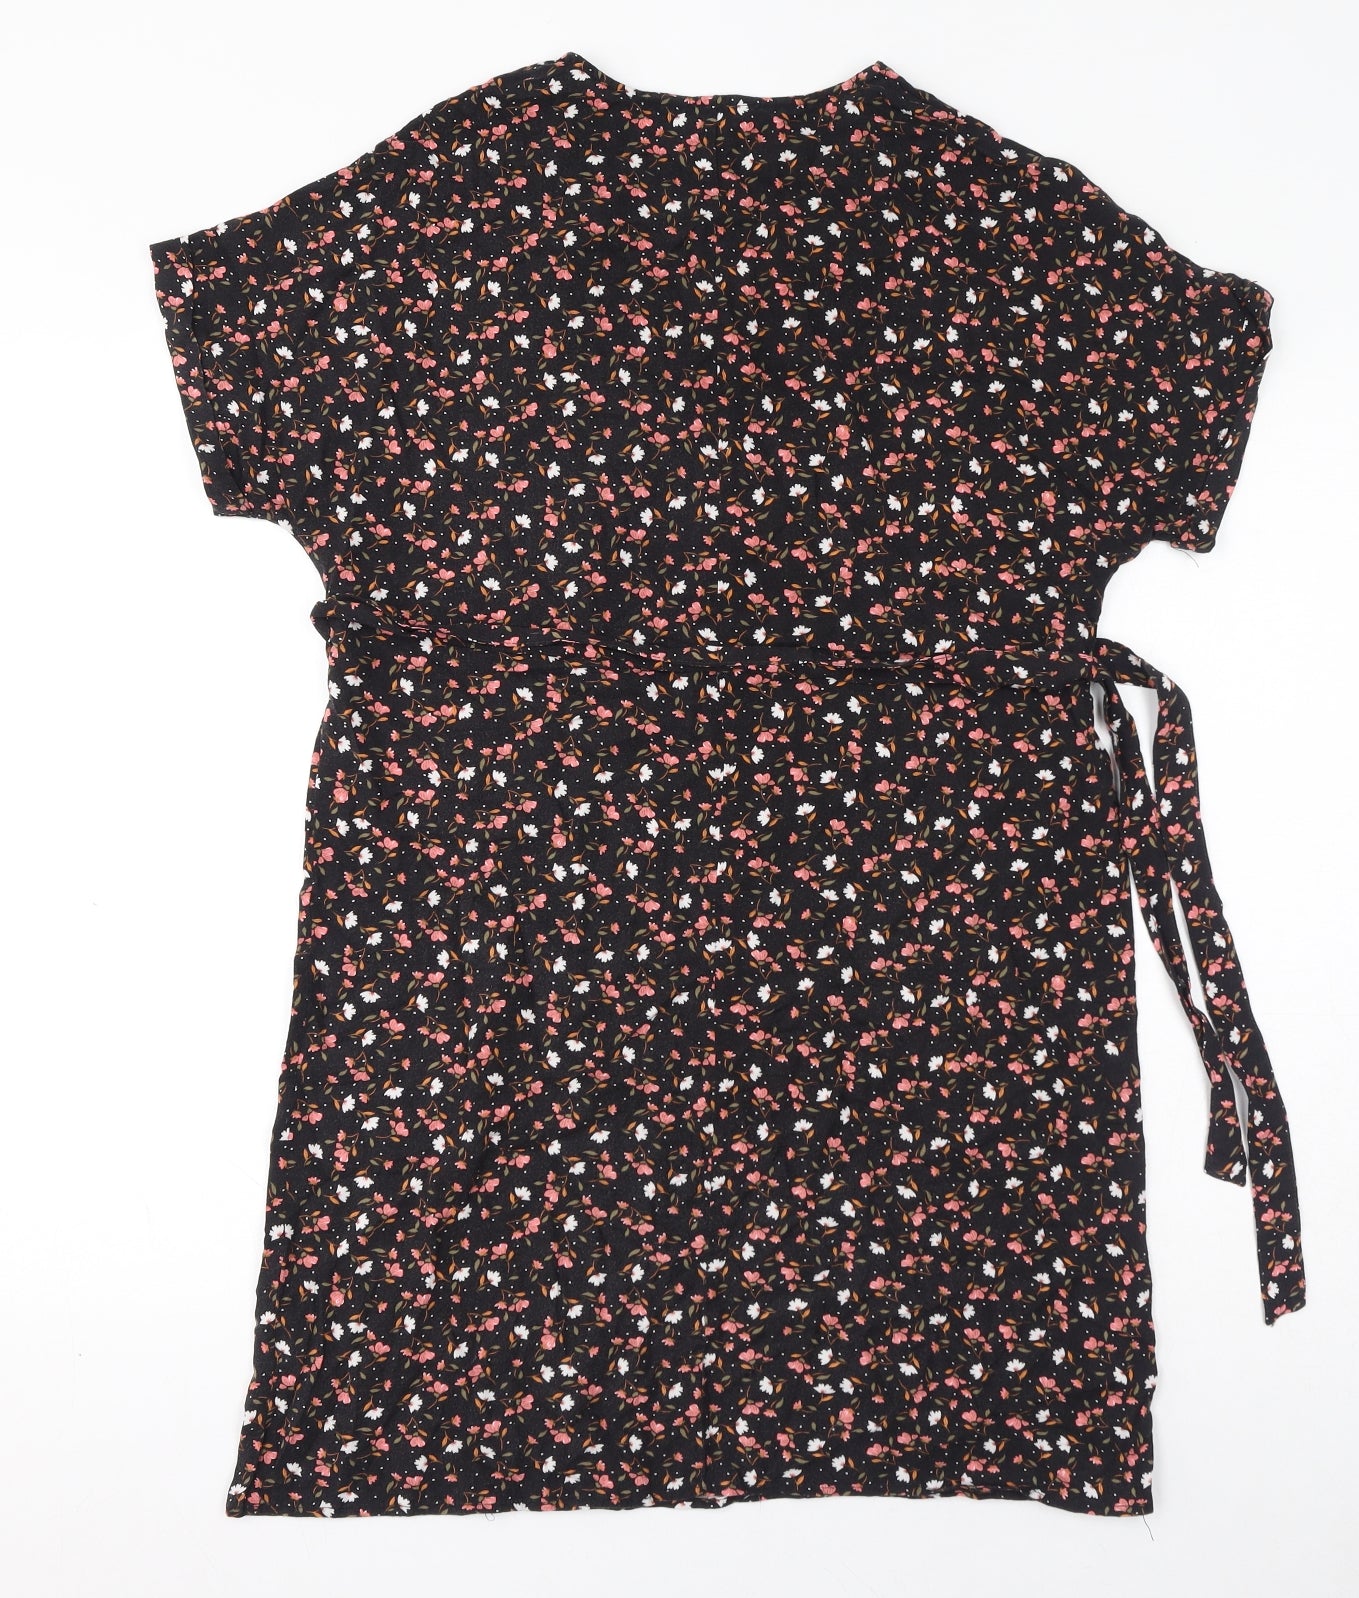 New Look Womens Black Floral Viscose T-Shirt Dress Size 10 V-Neck Pullover